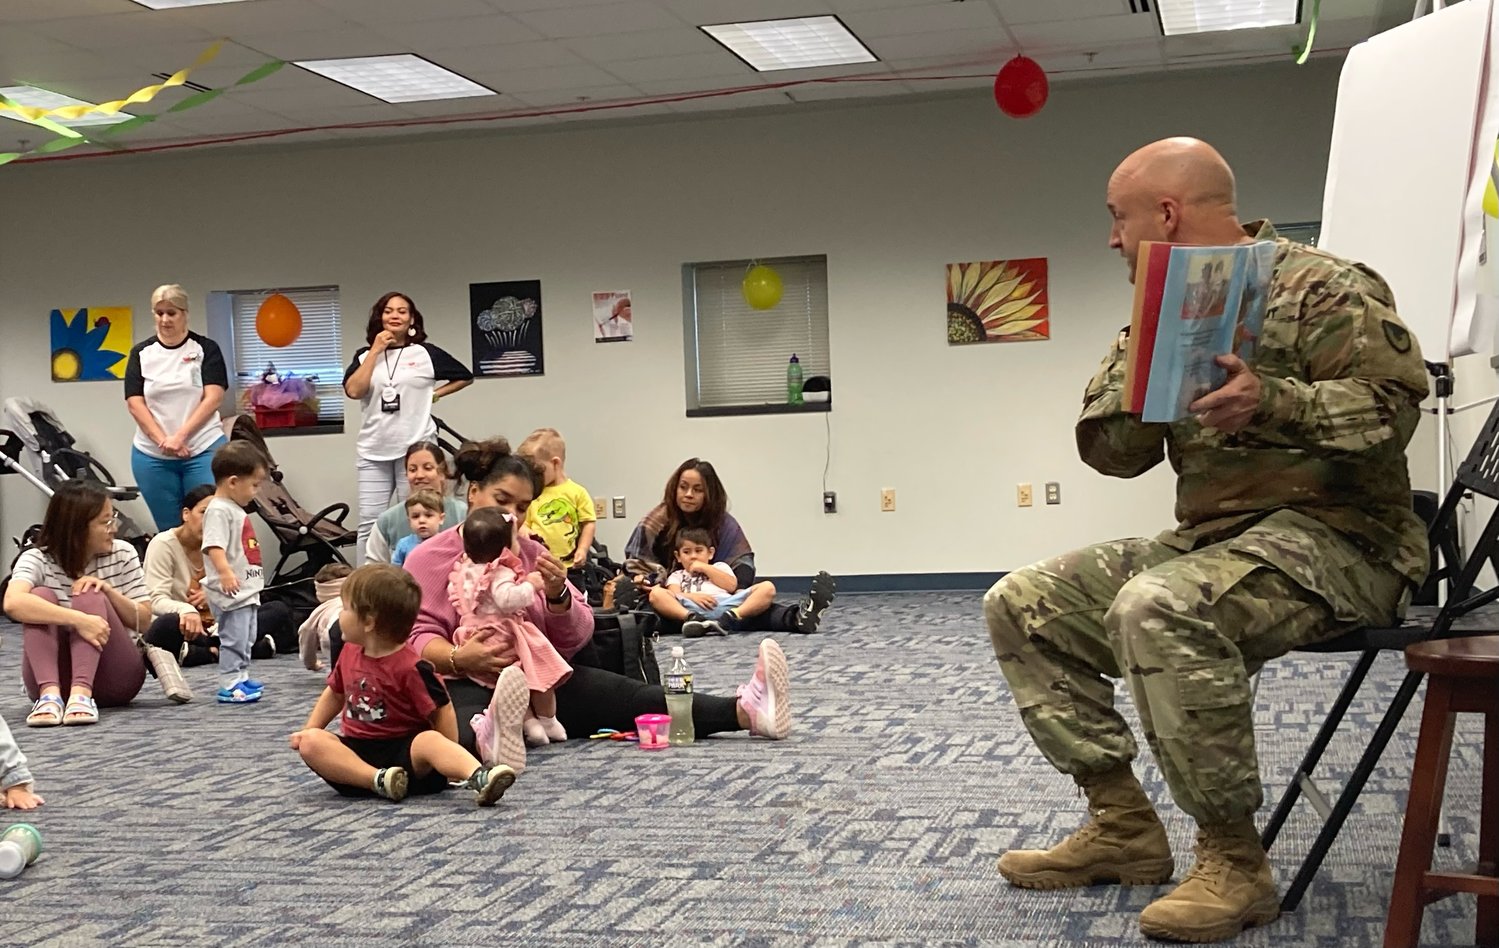 Col. John Wilcox, the Fort Bragg garrison commander, reads 'Lola at the Library' by Anna McQuinn during the 25th anniversary celebration of Throckmorton Library on Fort Bragg on Wednesday.